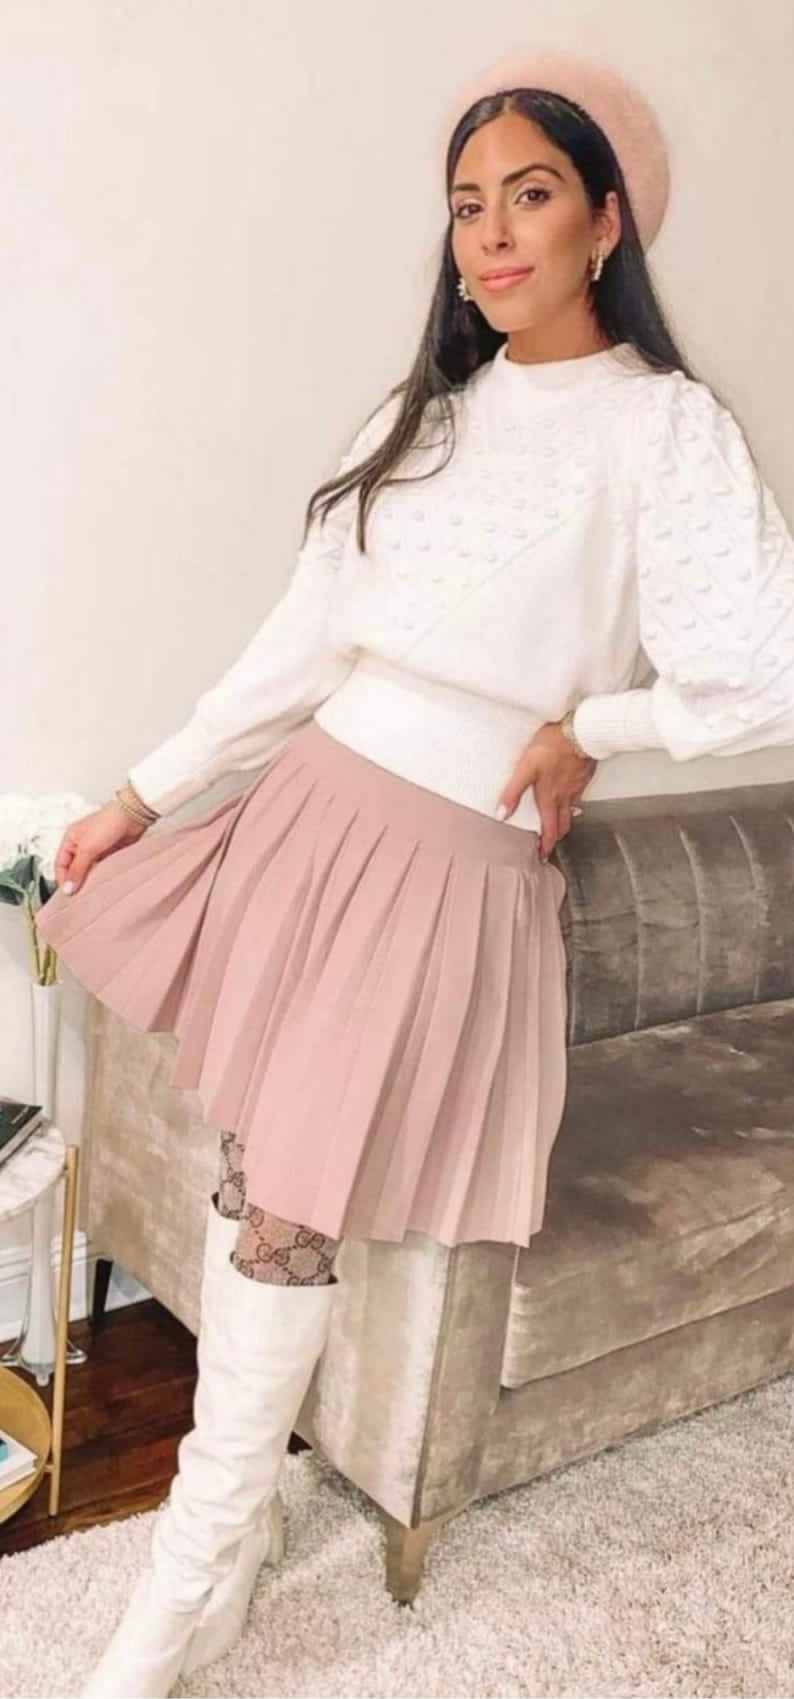 APPARALEL PLEATED KNIT SKIRT 27" DUSTY ROSE